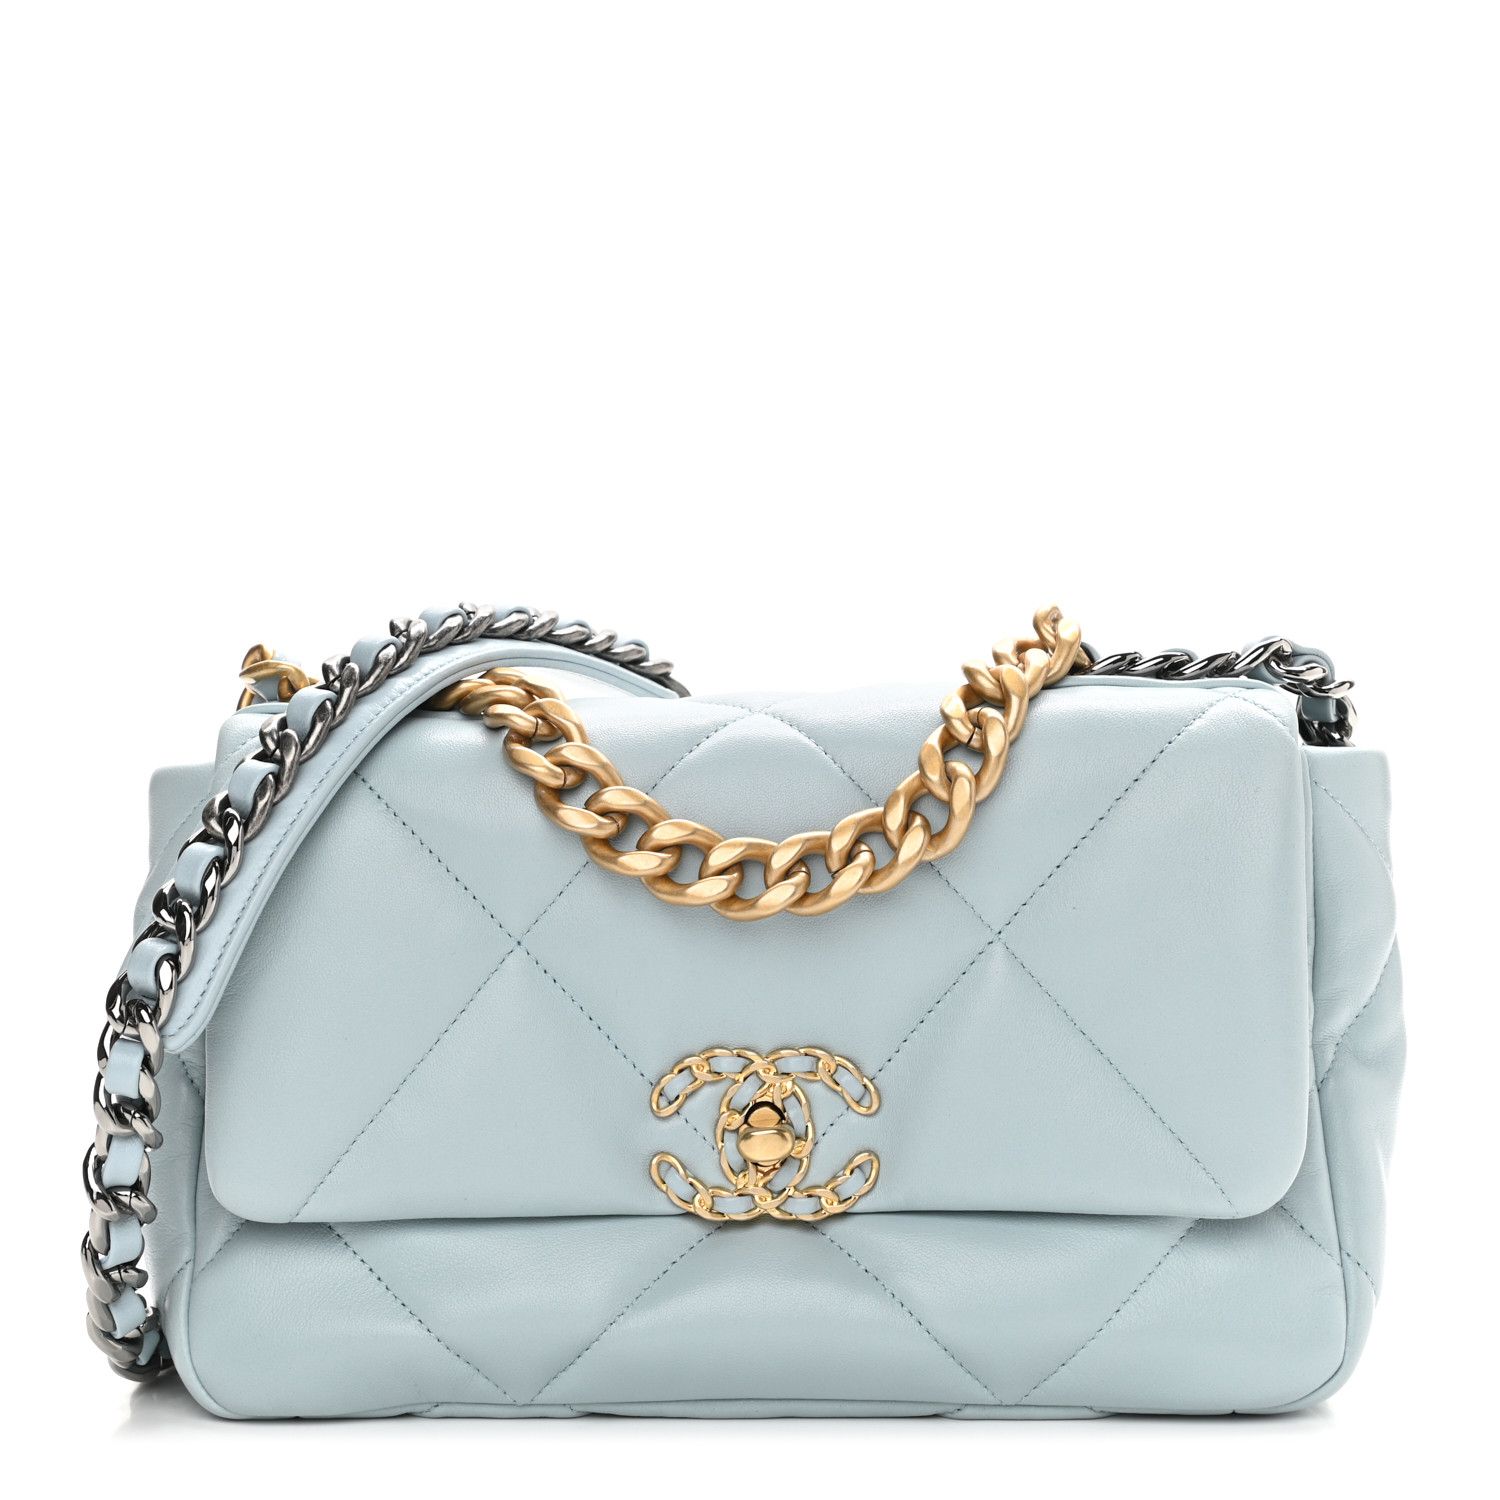 CHANEL Lambskin Quilted Medium Chanel 19 Flap Light Blue | FASHIONPHILE | Fashionphile